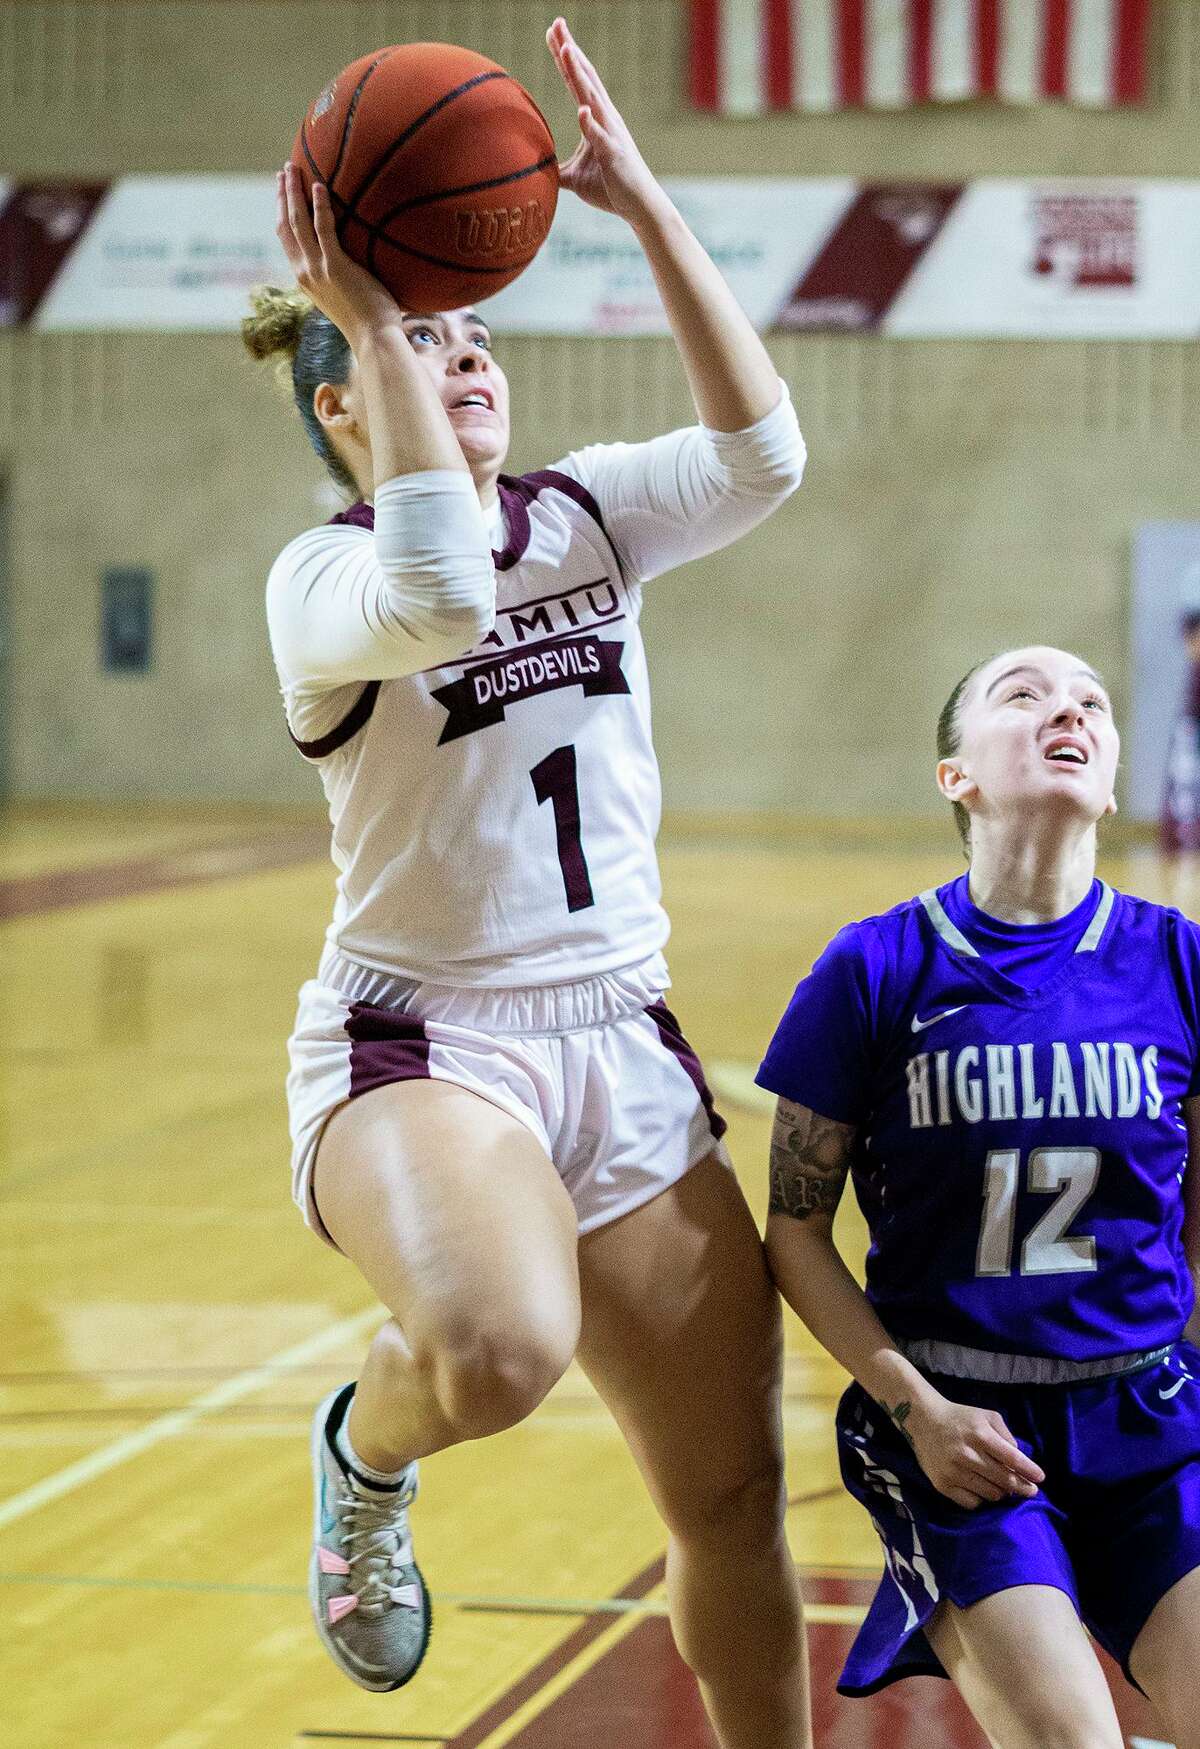 In this file photo, Texas A&M International University’s Evelyn Quiroz goes for a layup during a game against New Mexico Highlands.